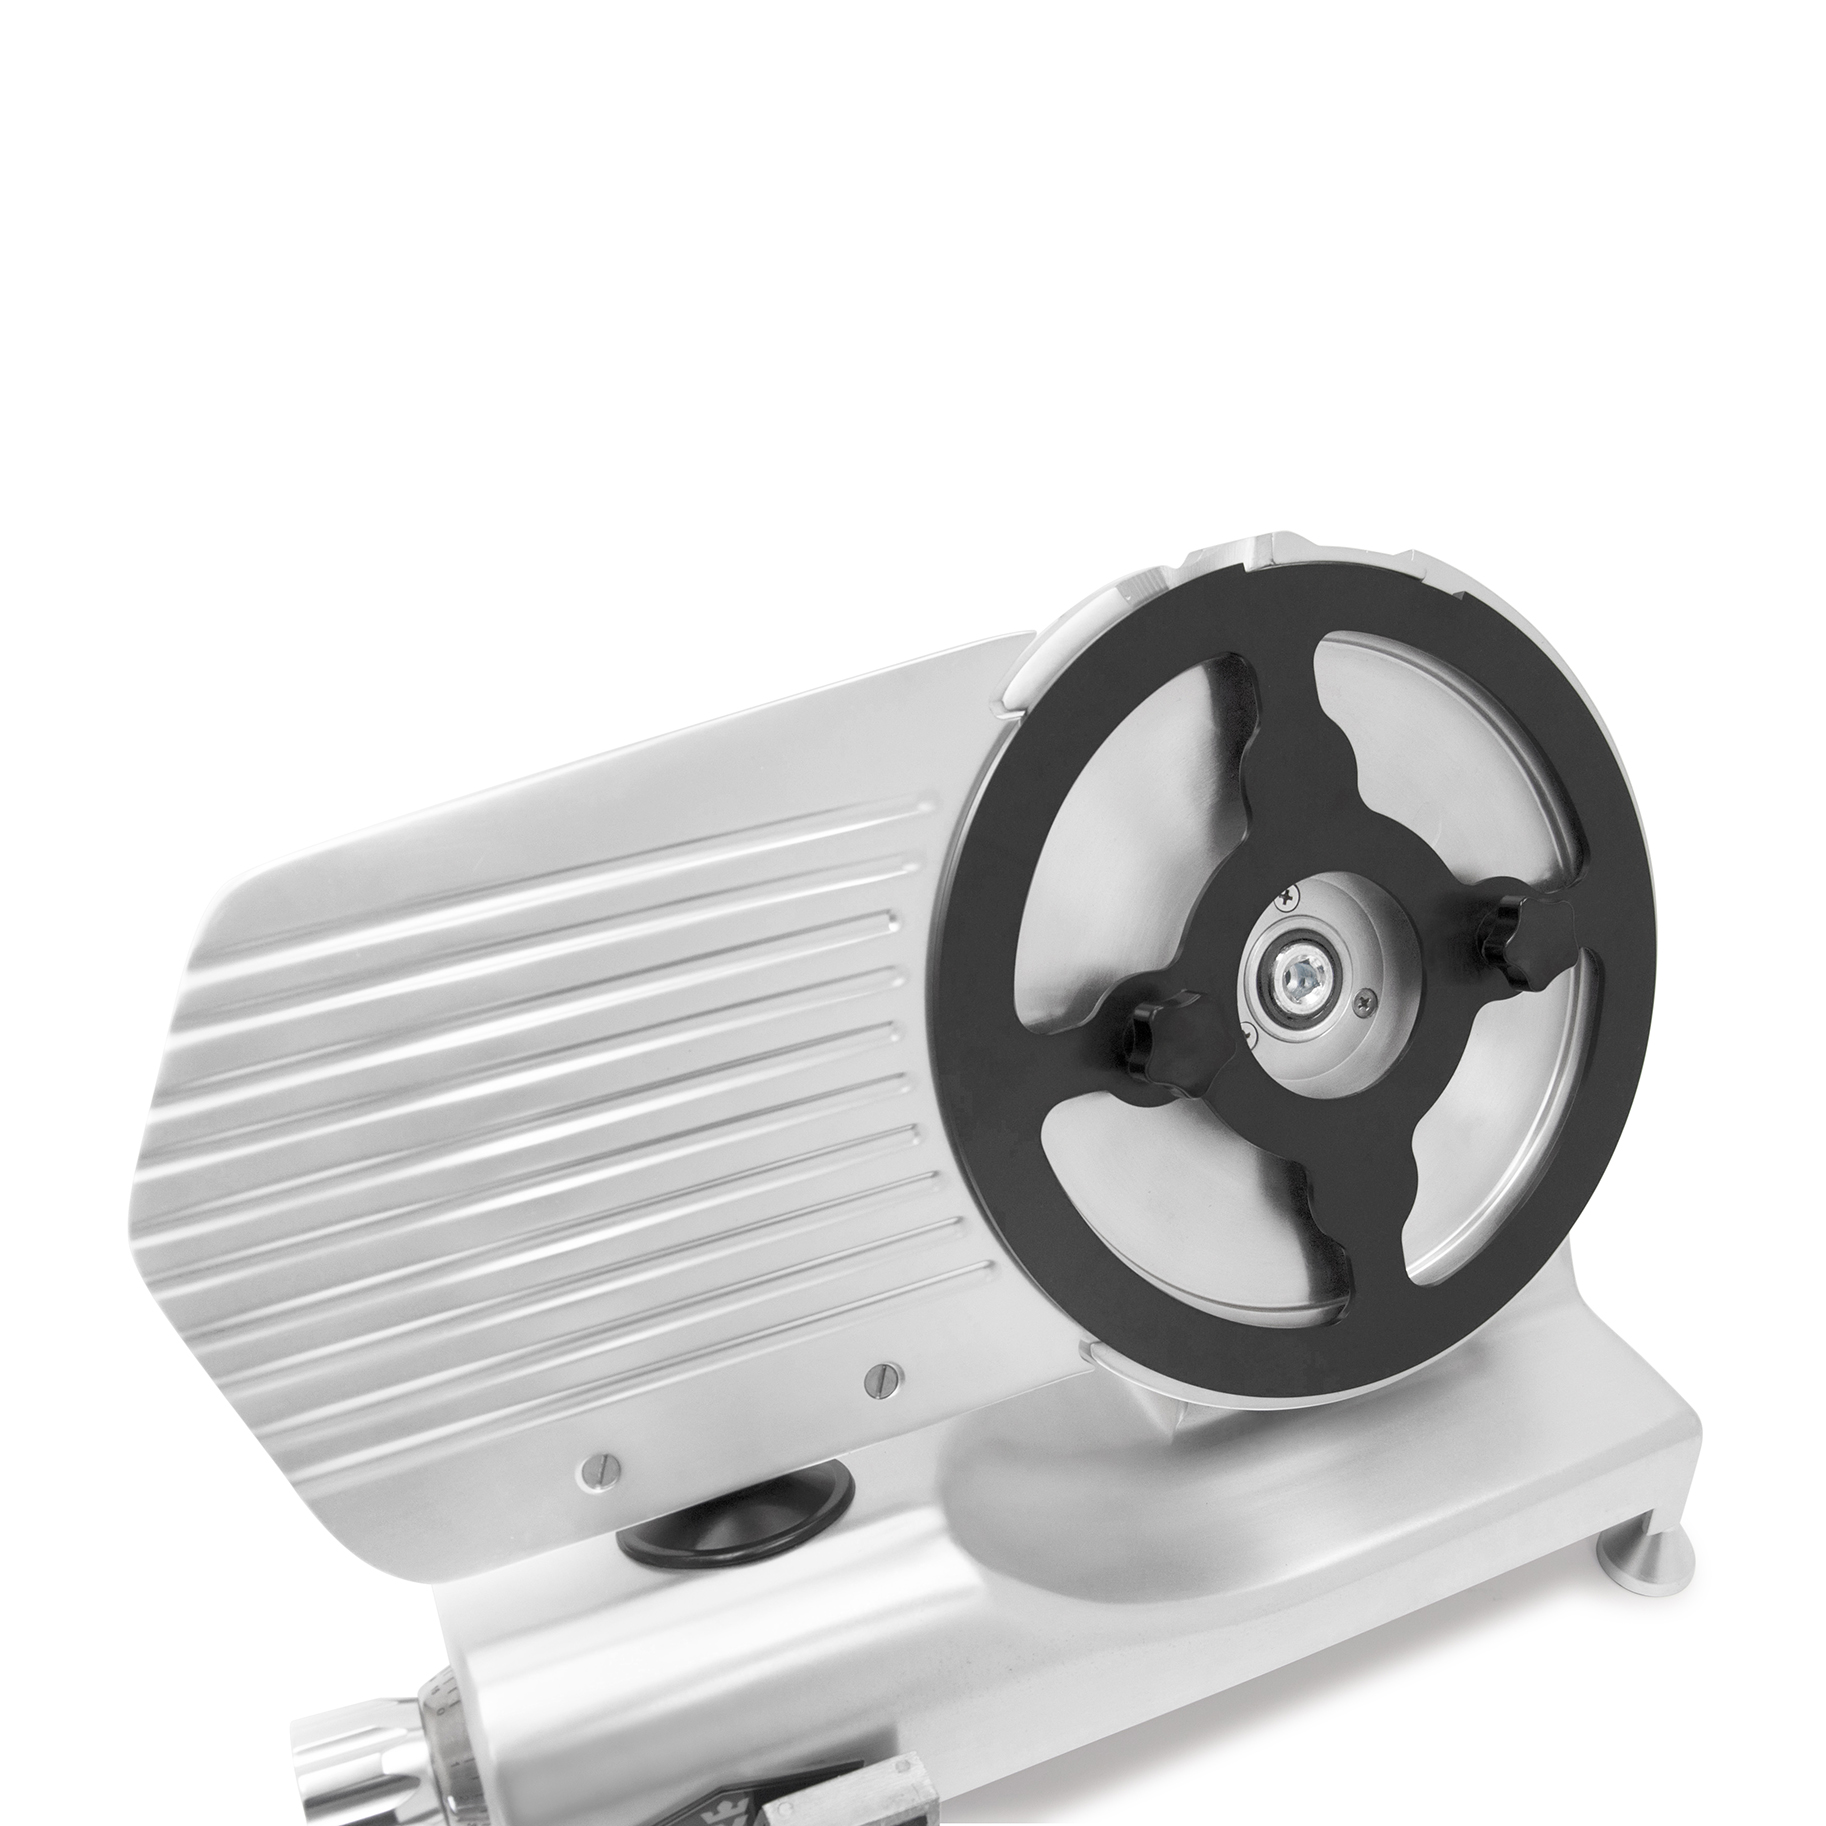 KWS® MS-12A Commercial Automatic Meat Slicer